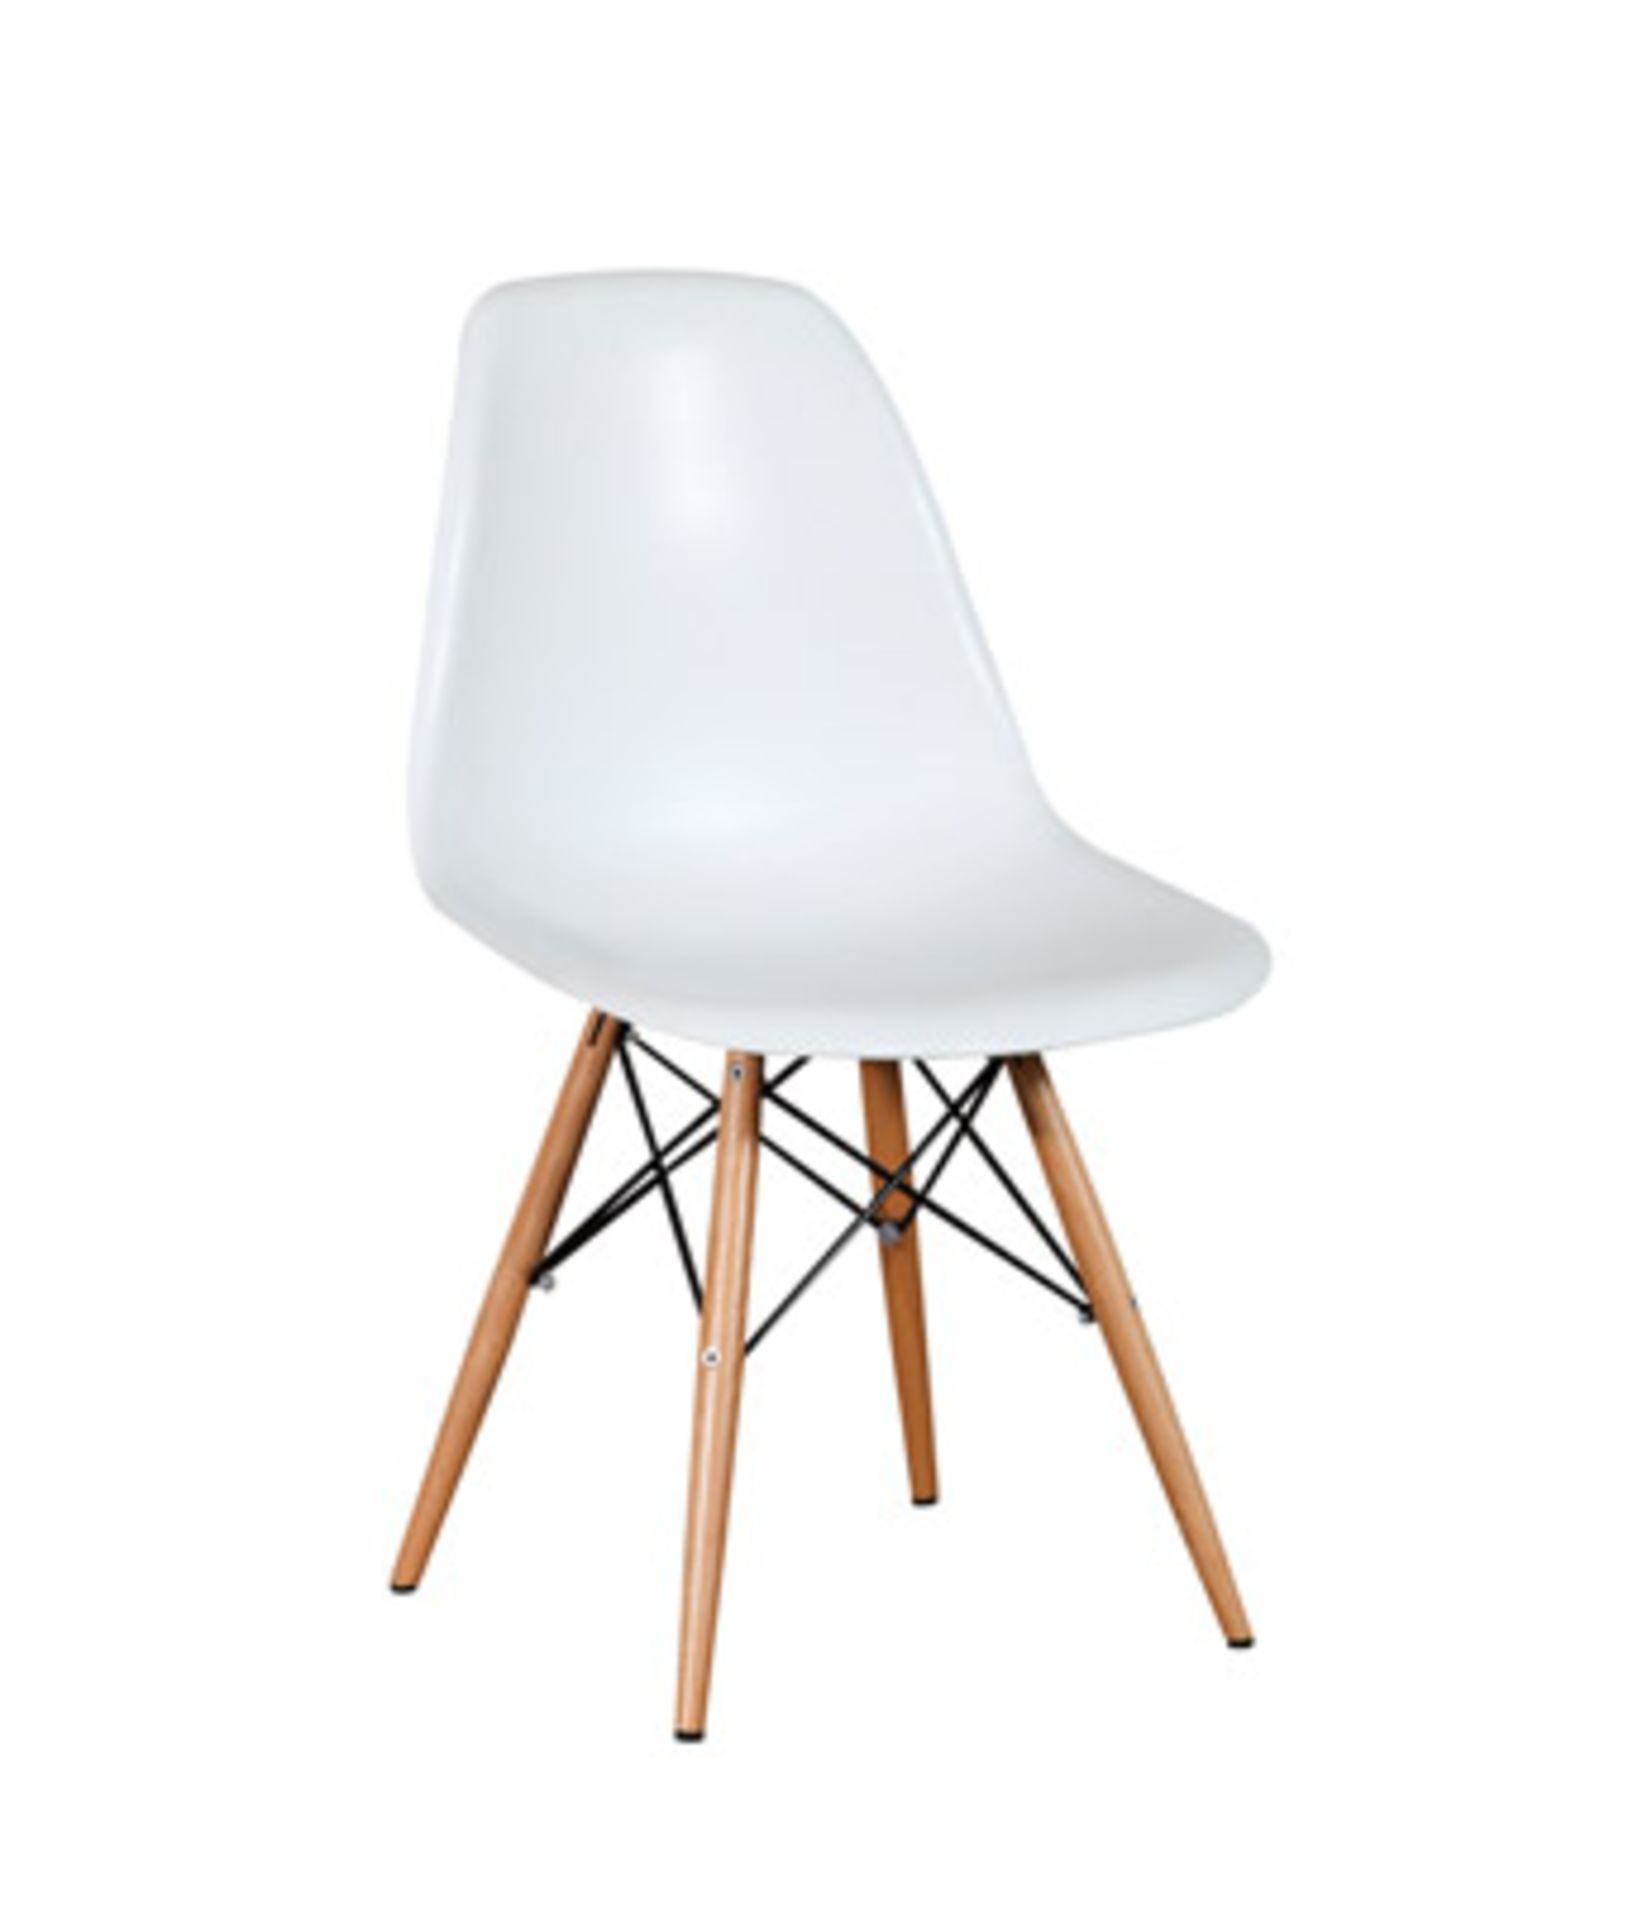 X1 BOXED BRAND NEW DESIGNER EAMES STYLE CHAIR, WHITE, RRP-£99.99 (MD-CHAIR)